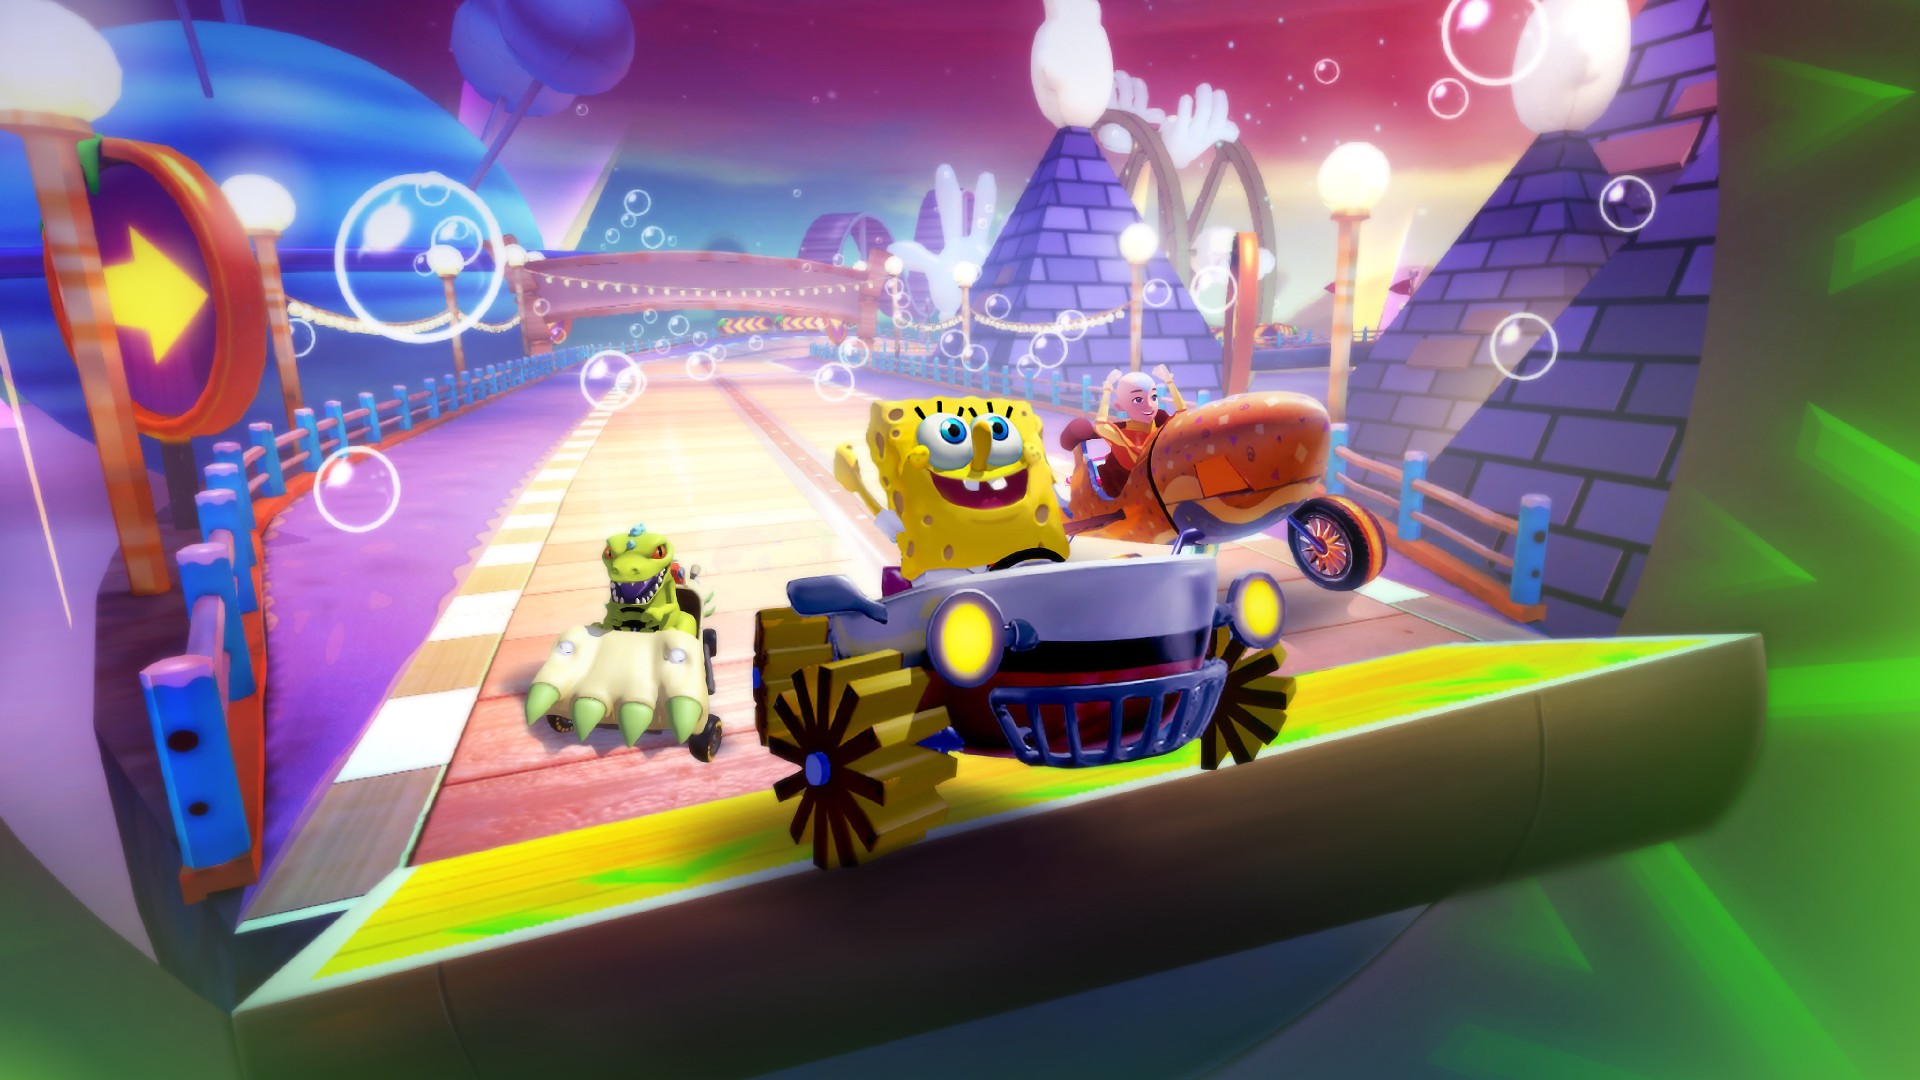 Video For 30 Playable Racers and 70 Pit Crew Members Featured in Nickelodeon Kart Racers 2, Available Now on Xbox One